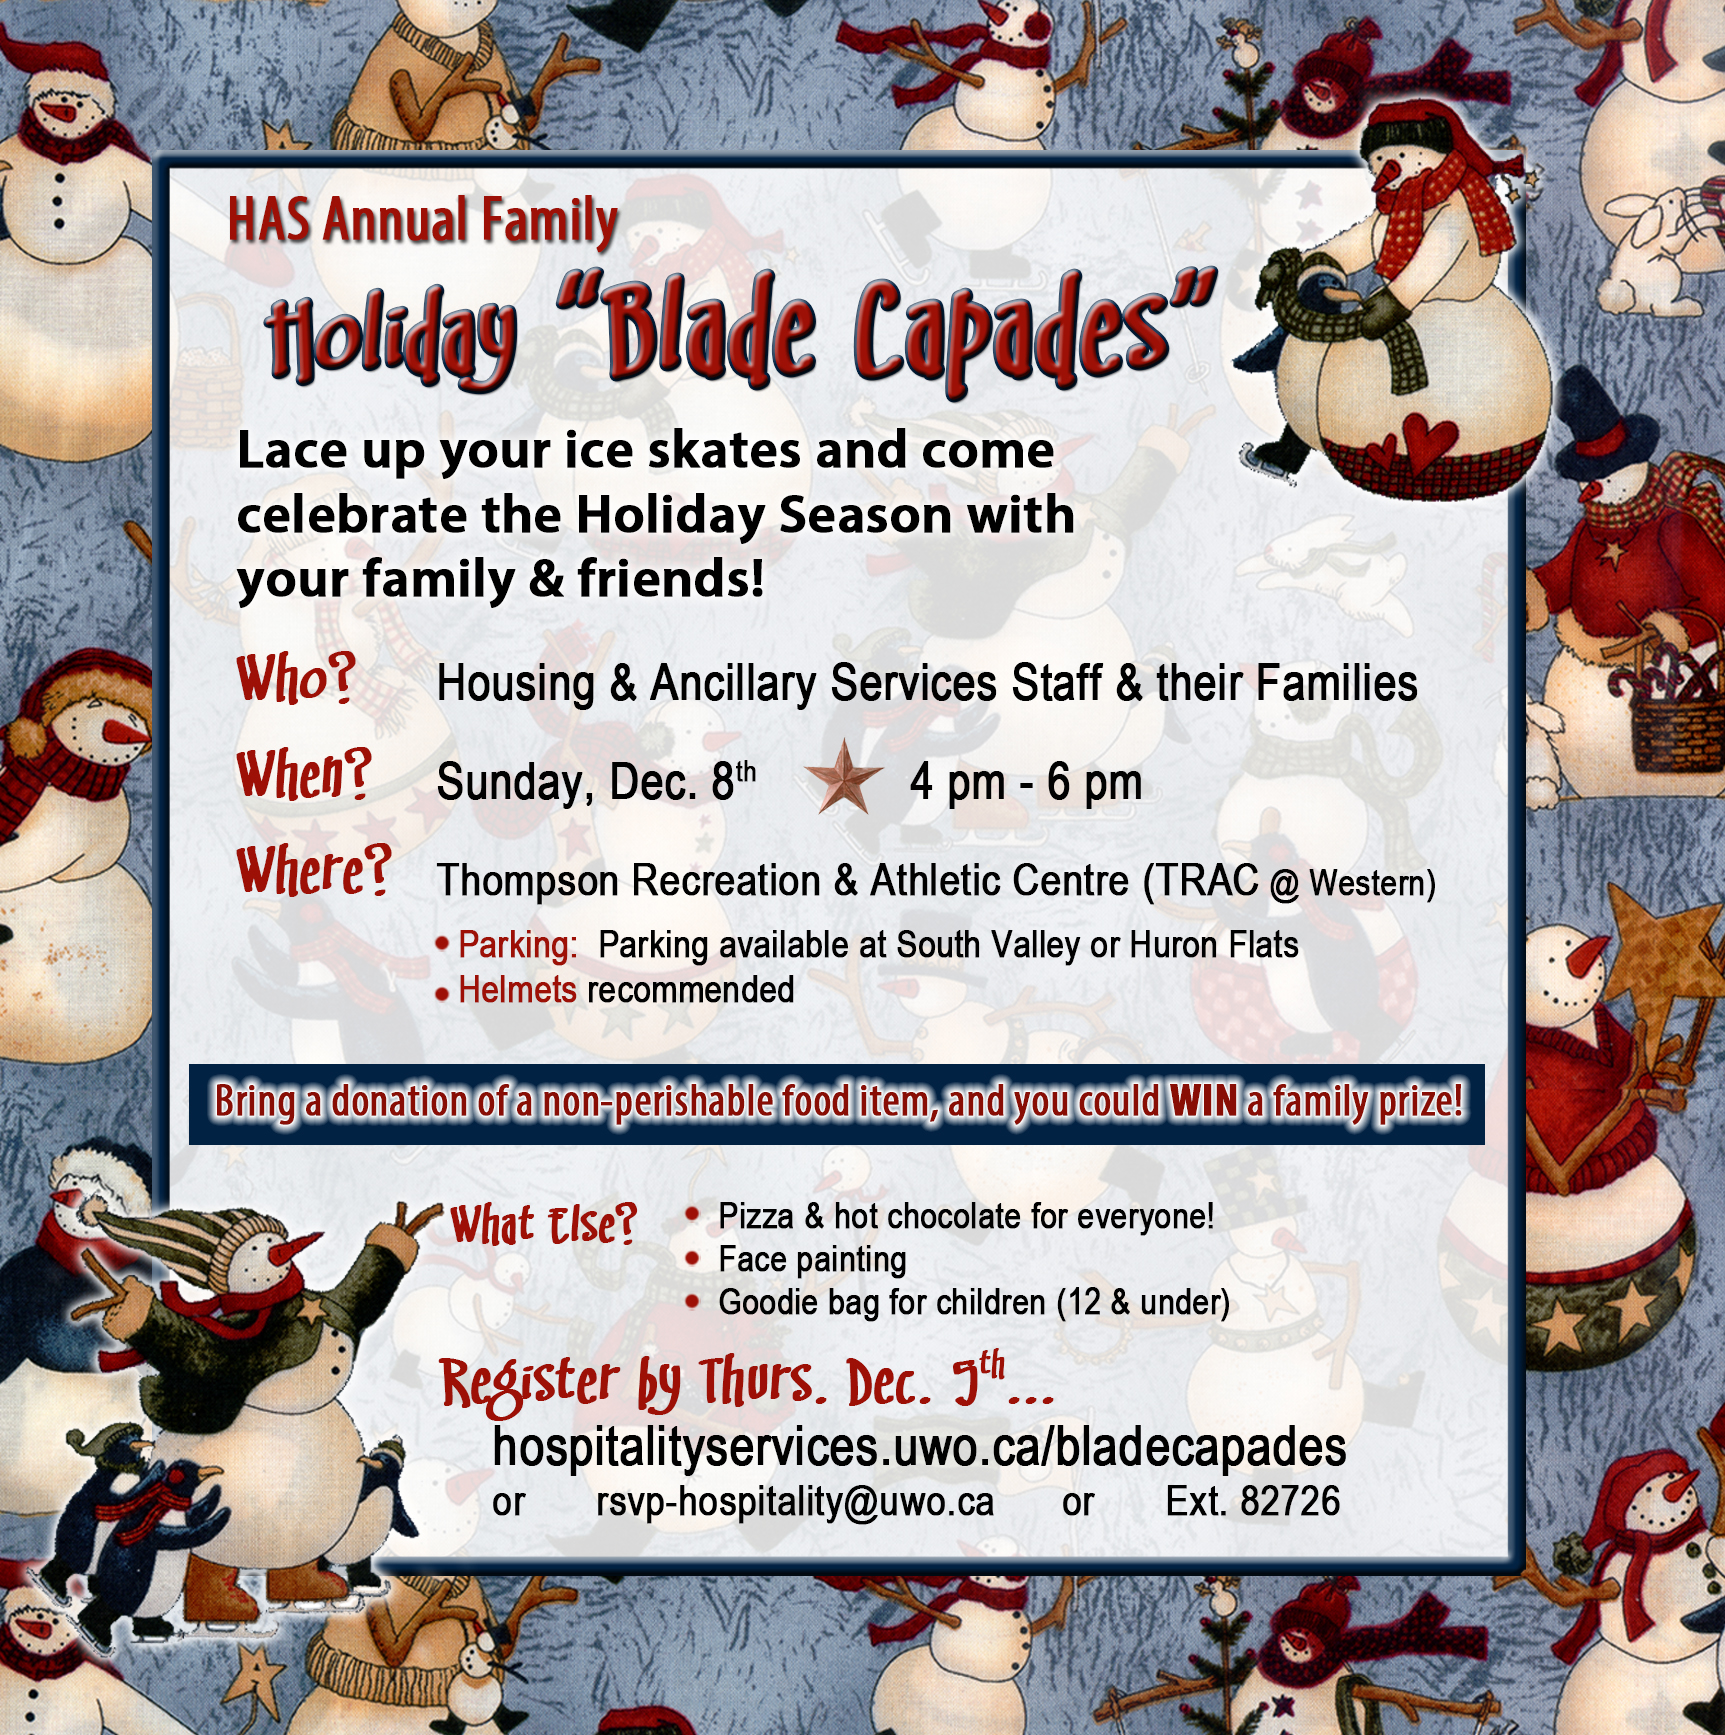 Annual Holiday Blade Capades. Lace up your ice skates and come celebrate the Holiday Season with your family & friends! Who - Housing & Ancillary Services Staff & their Families, When - Sunday, Dec. 8th 4pm - 6pm, Where - Thompson Recreation & Athletic Centre (TRAC @ Western), Parking available at South Valley or Huron Flats. Helmets recommended. Bring a donation of a non-perishable food item, and you could WIN a family prize! Pizza & hot chocolate for everyone! Face painting, Goodie bag for children (12 & under). Register by Thurs. Dec. 5th... rsvp-hospitality@uwo.ca or Ext. 82726